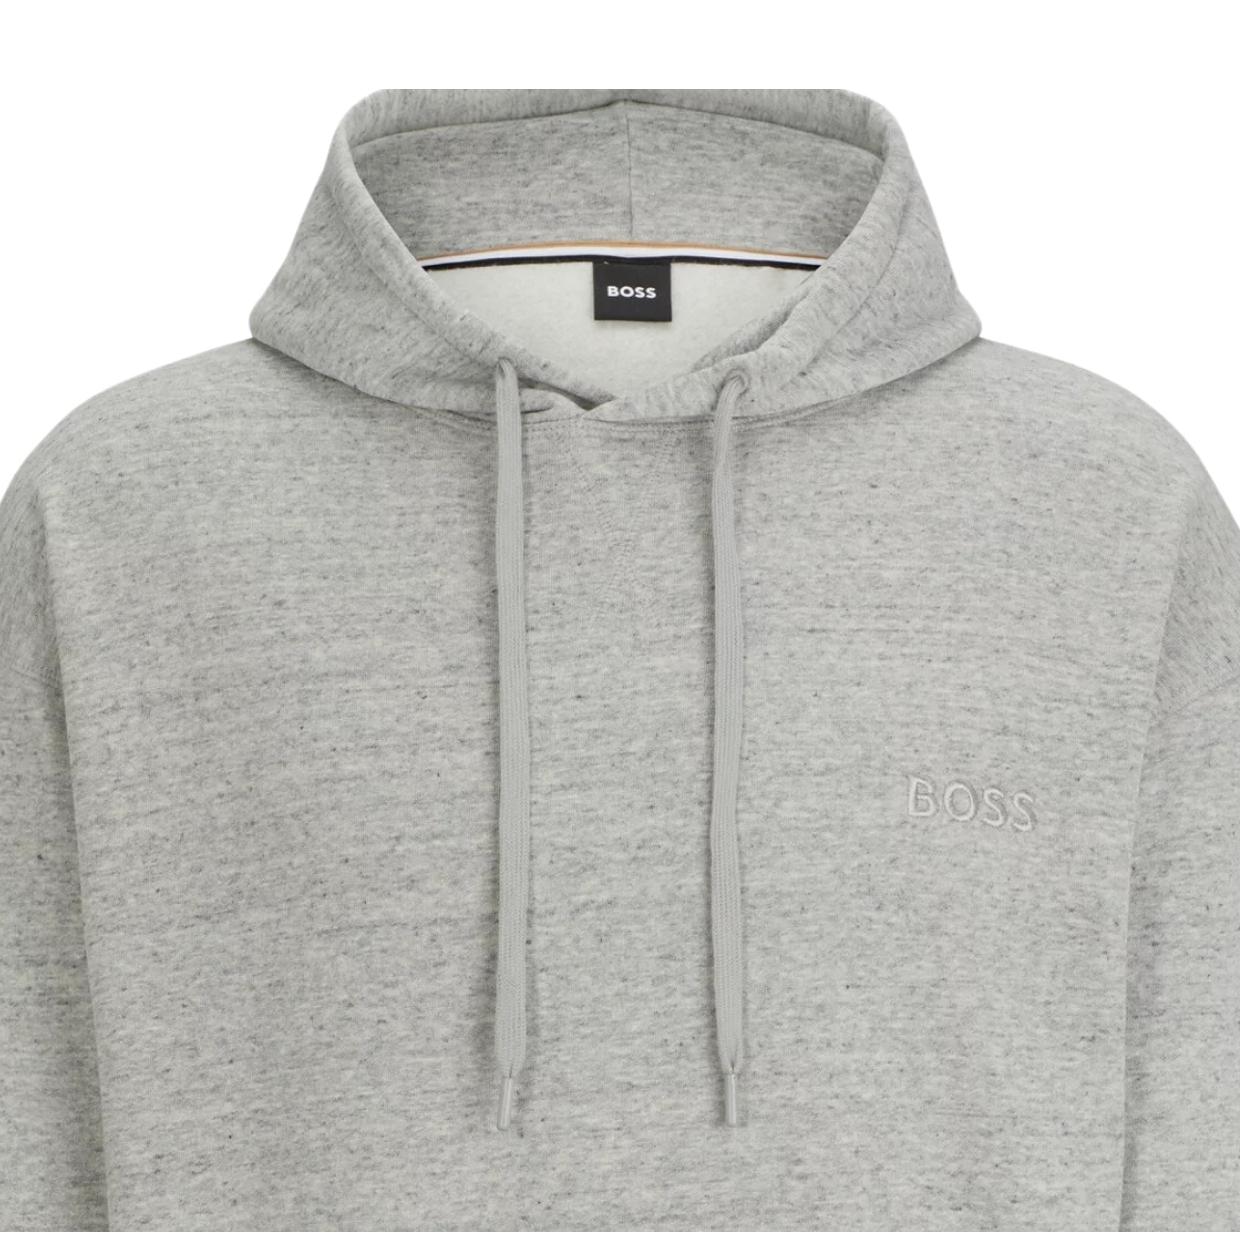 BOSS Embroidered Logo Grey Cozy Hoodie